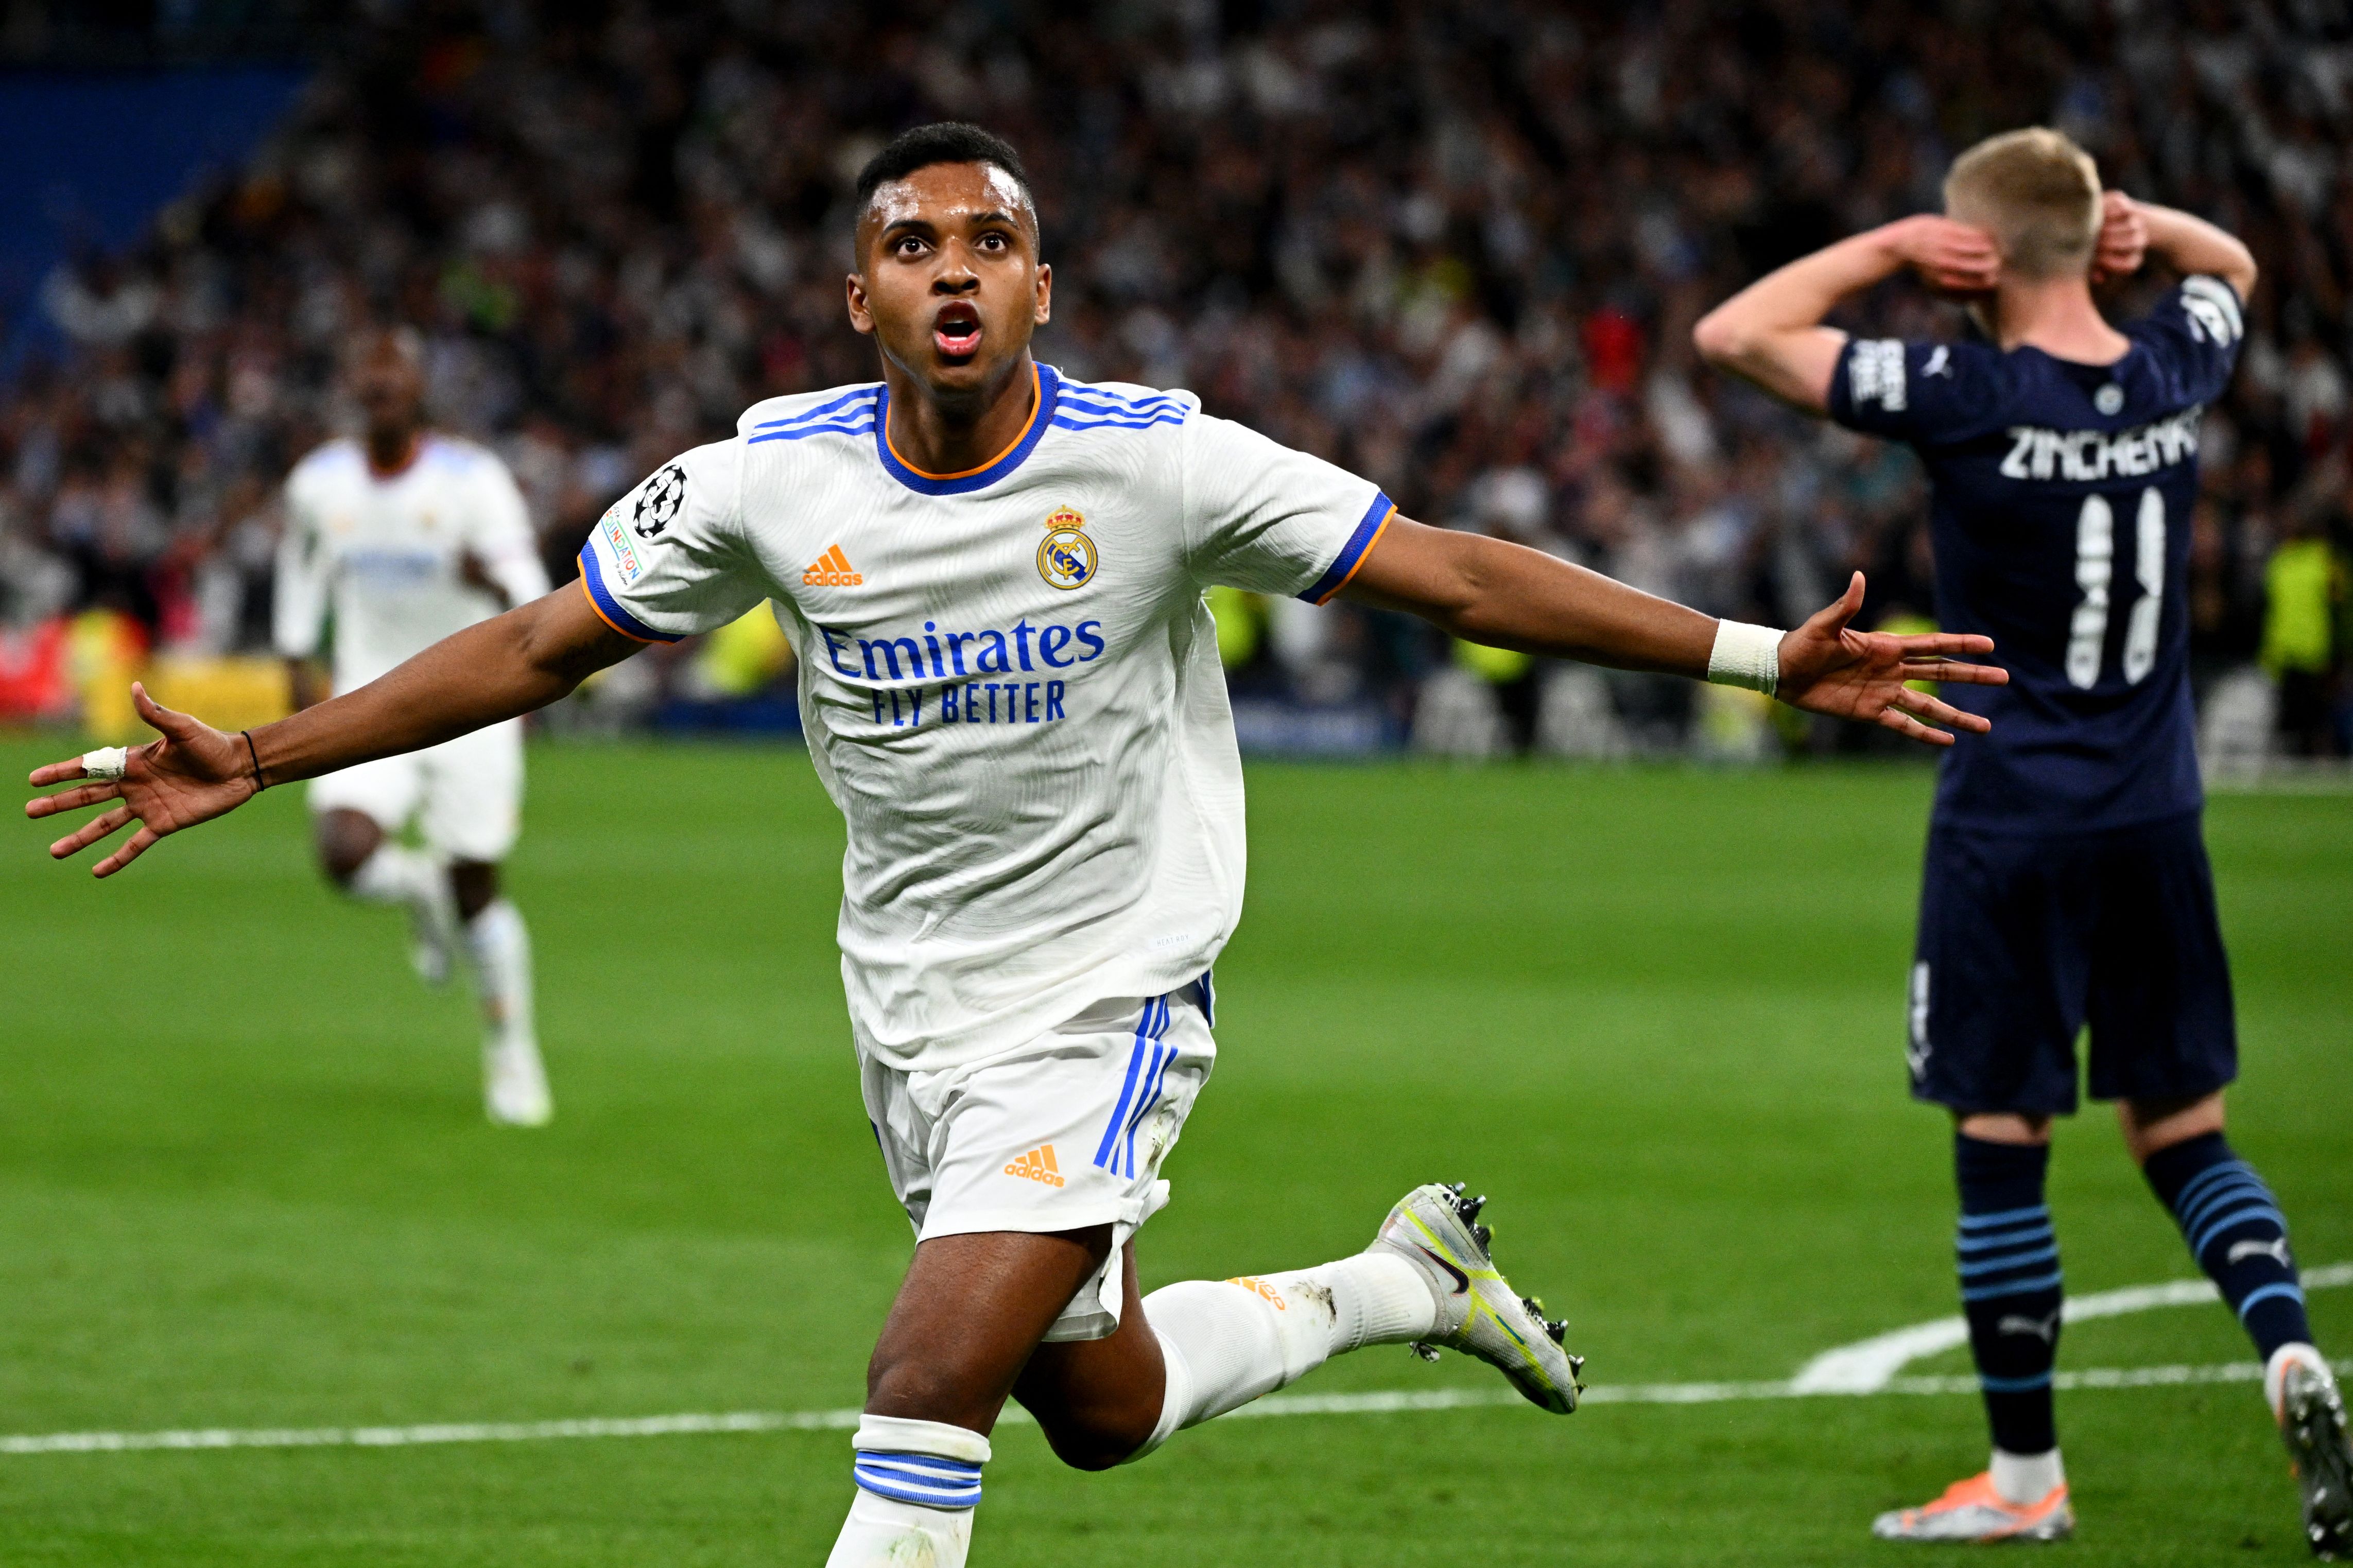 Rodrygo set for new contract with €1bn release clause as reward for another strong season